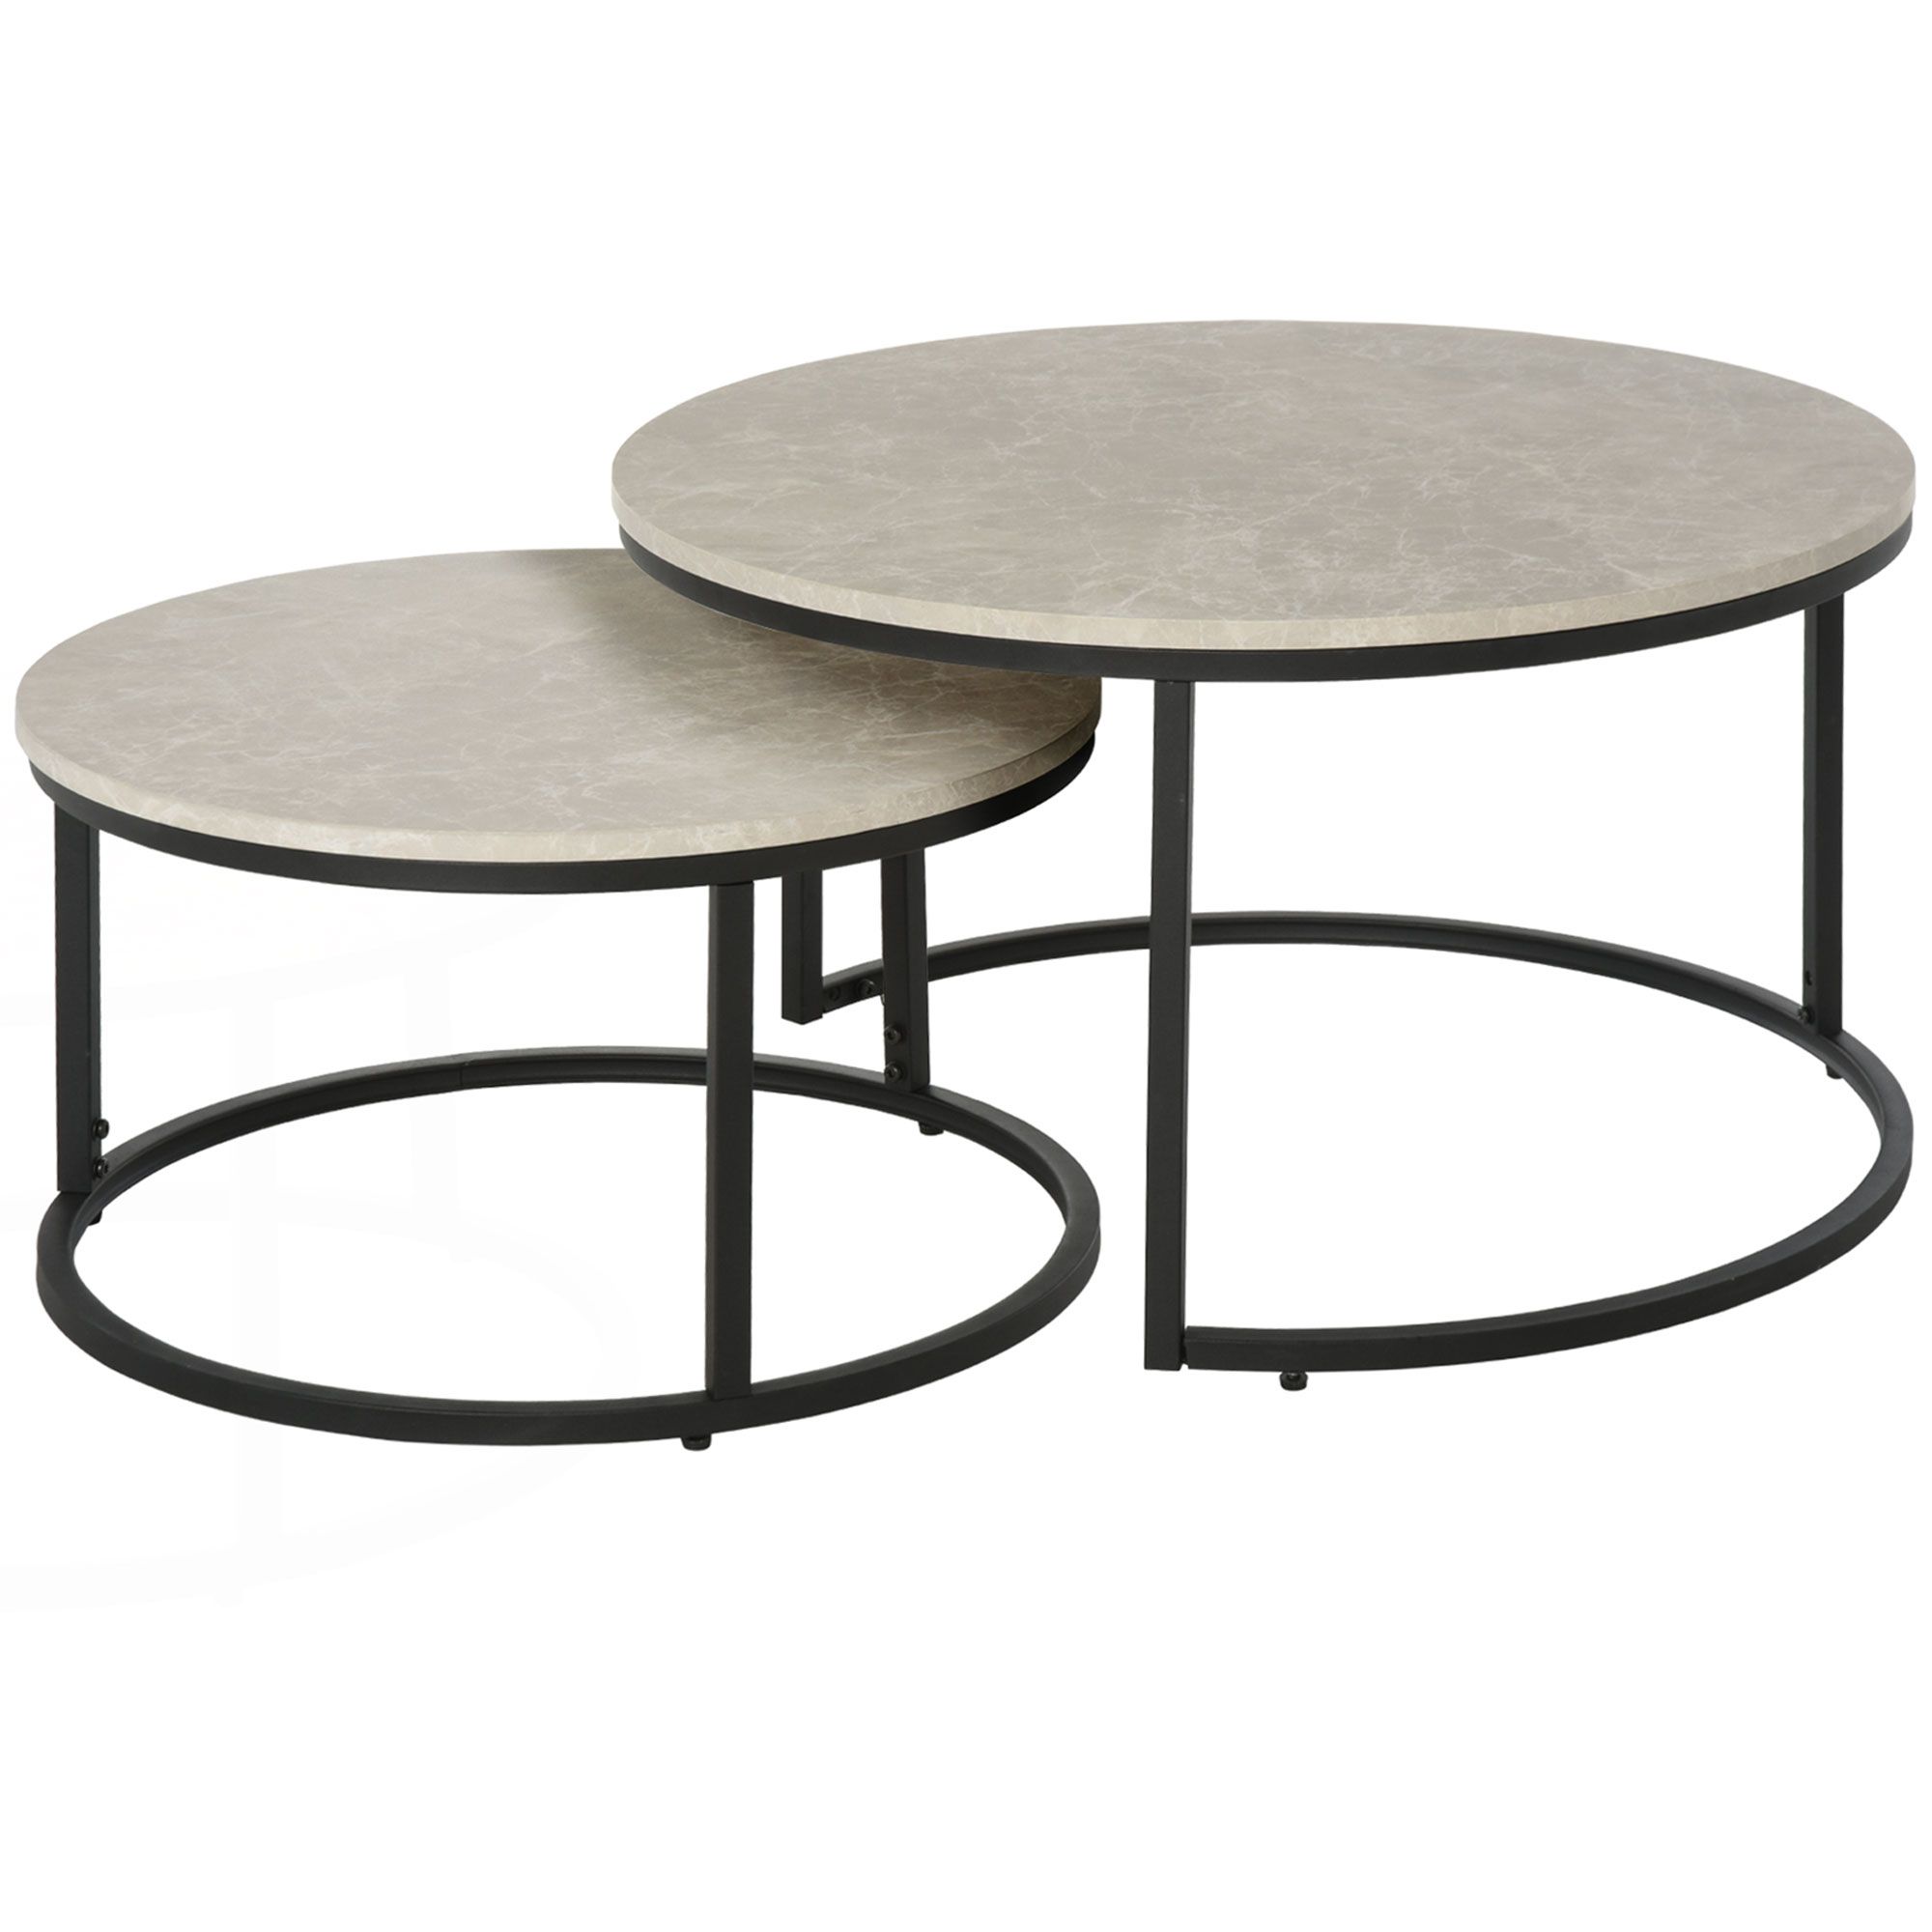 Homcom 2 Pcs Stacking Coffee Table Set W/ Steel Frame Marble-effect Top Foot Pads Nest Of Tables Storage Display Black/grey